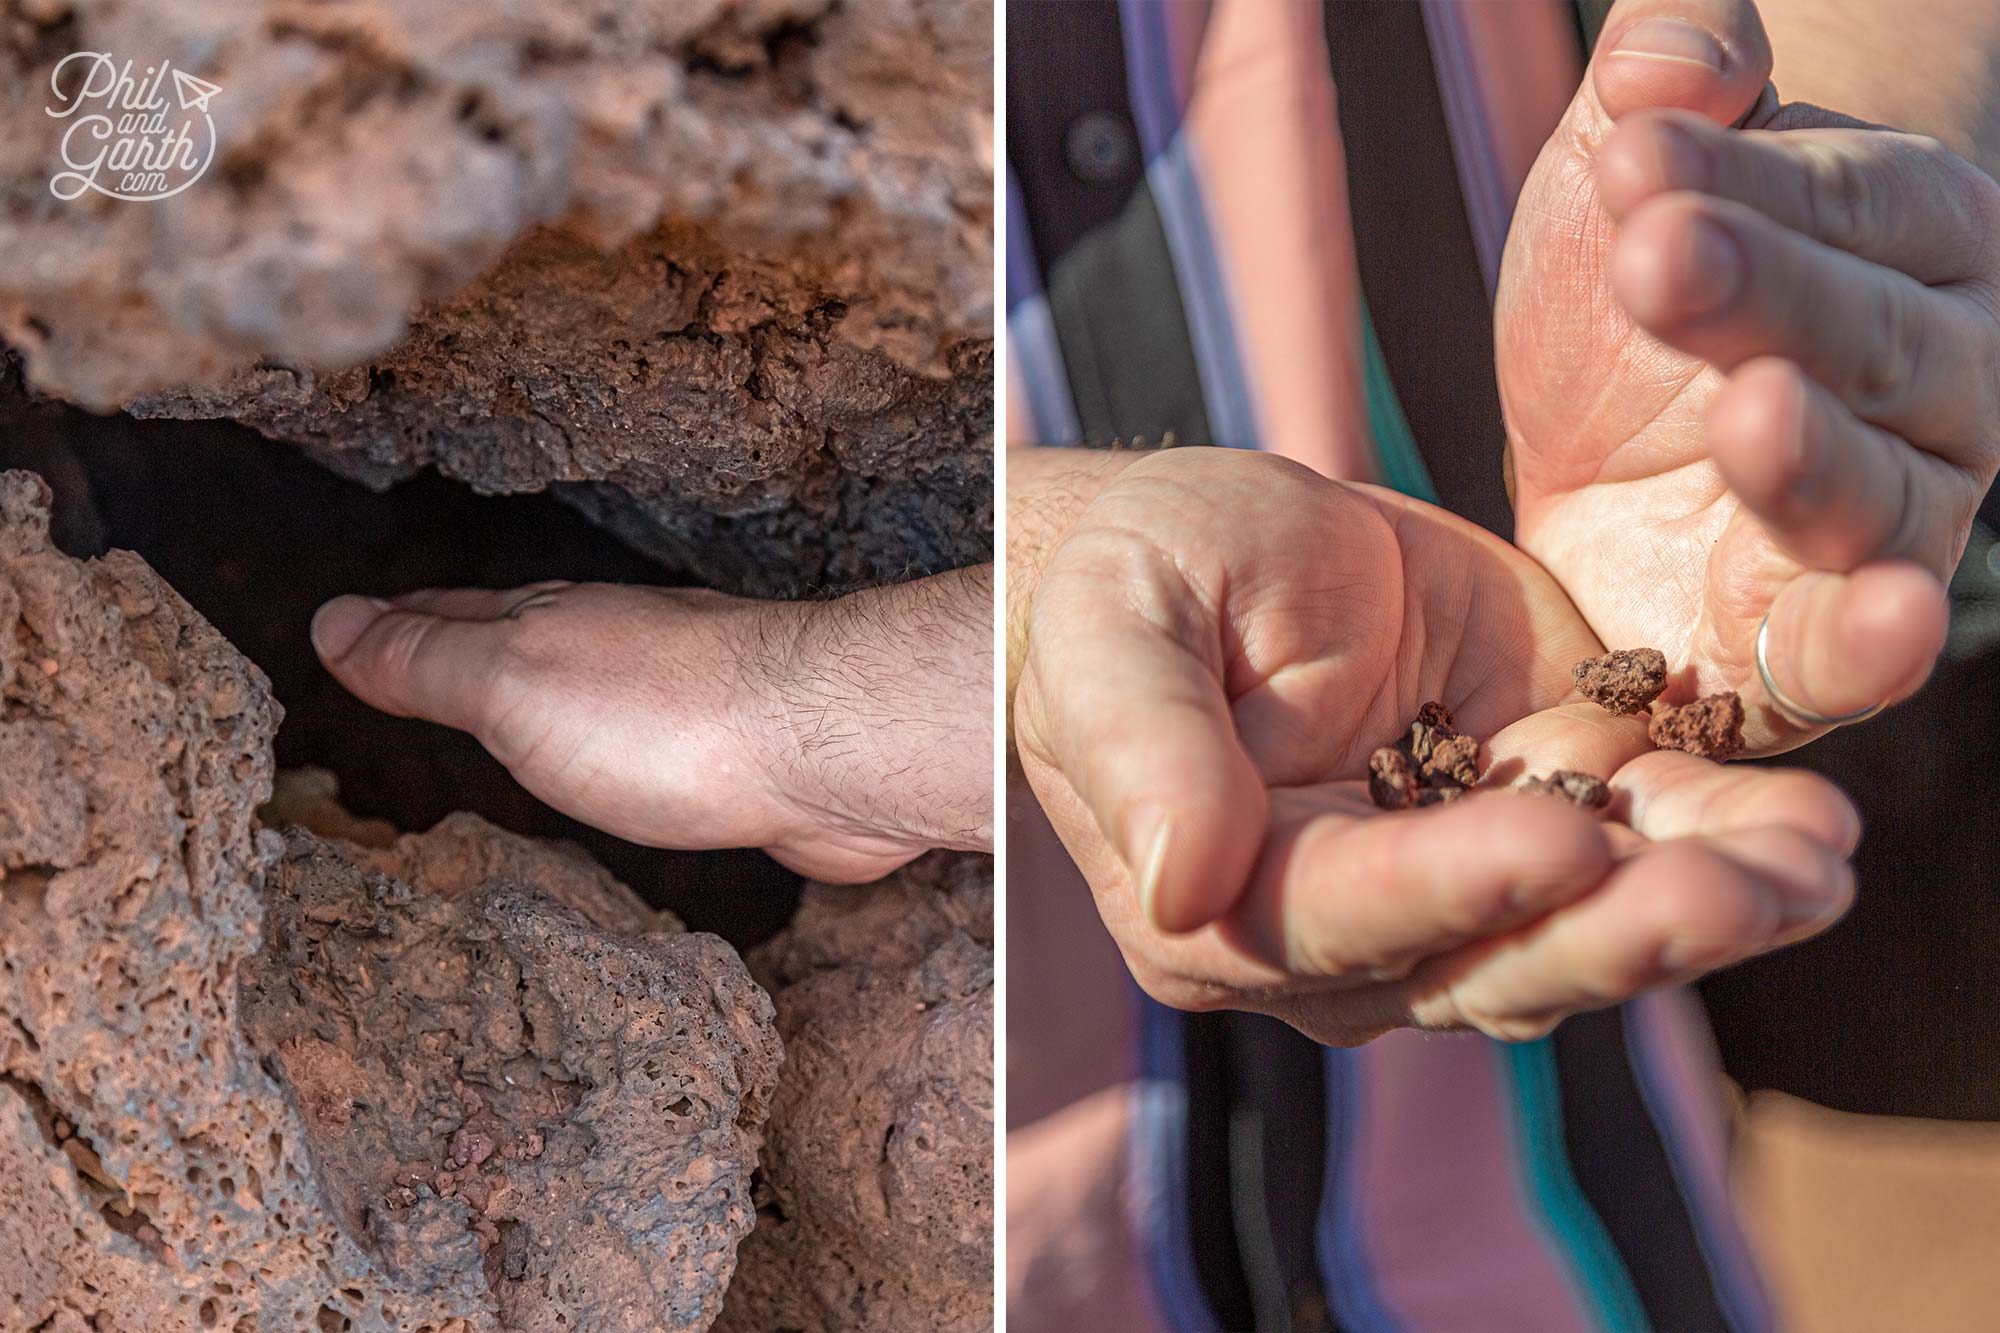 Feel the heat of the volcano by sticking your hand in a crack or picking up some gravel stones